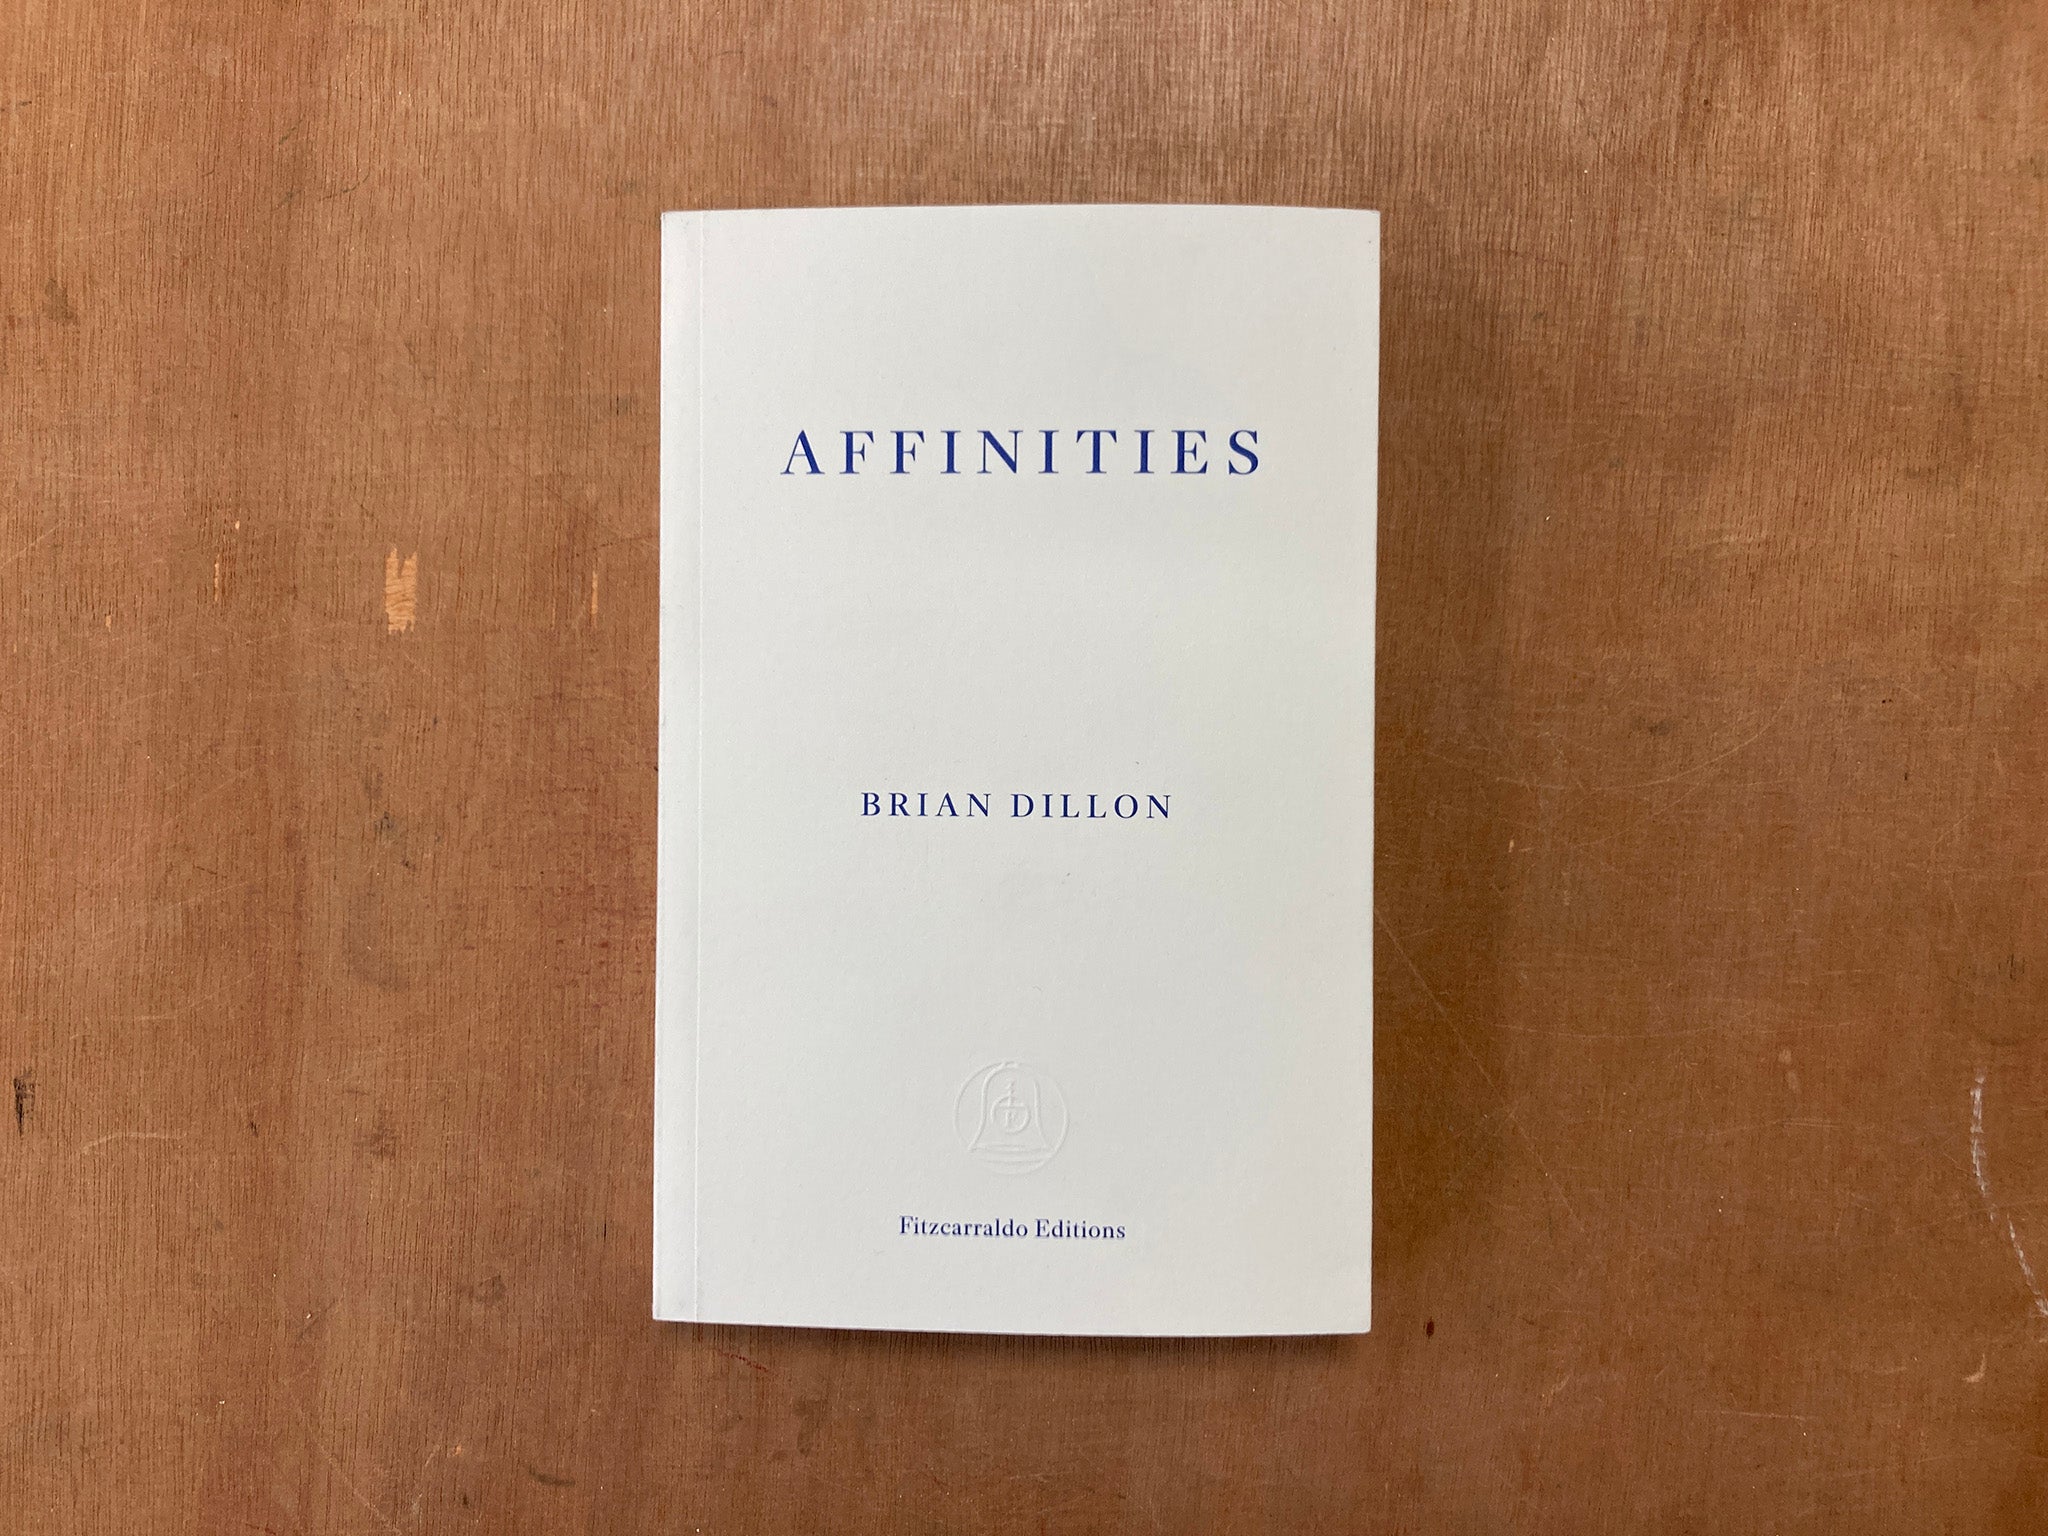 AFFINITIES by Brian Dillon